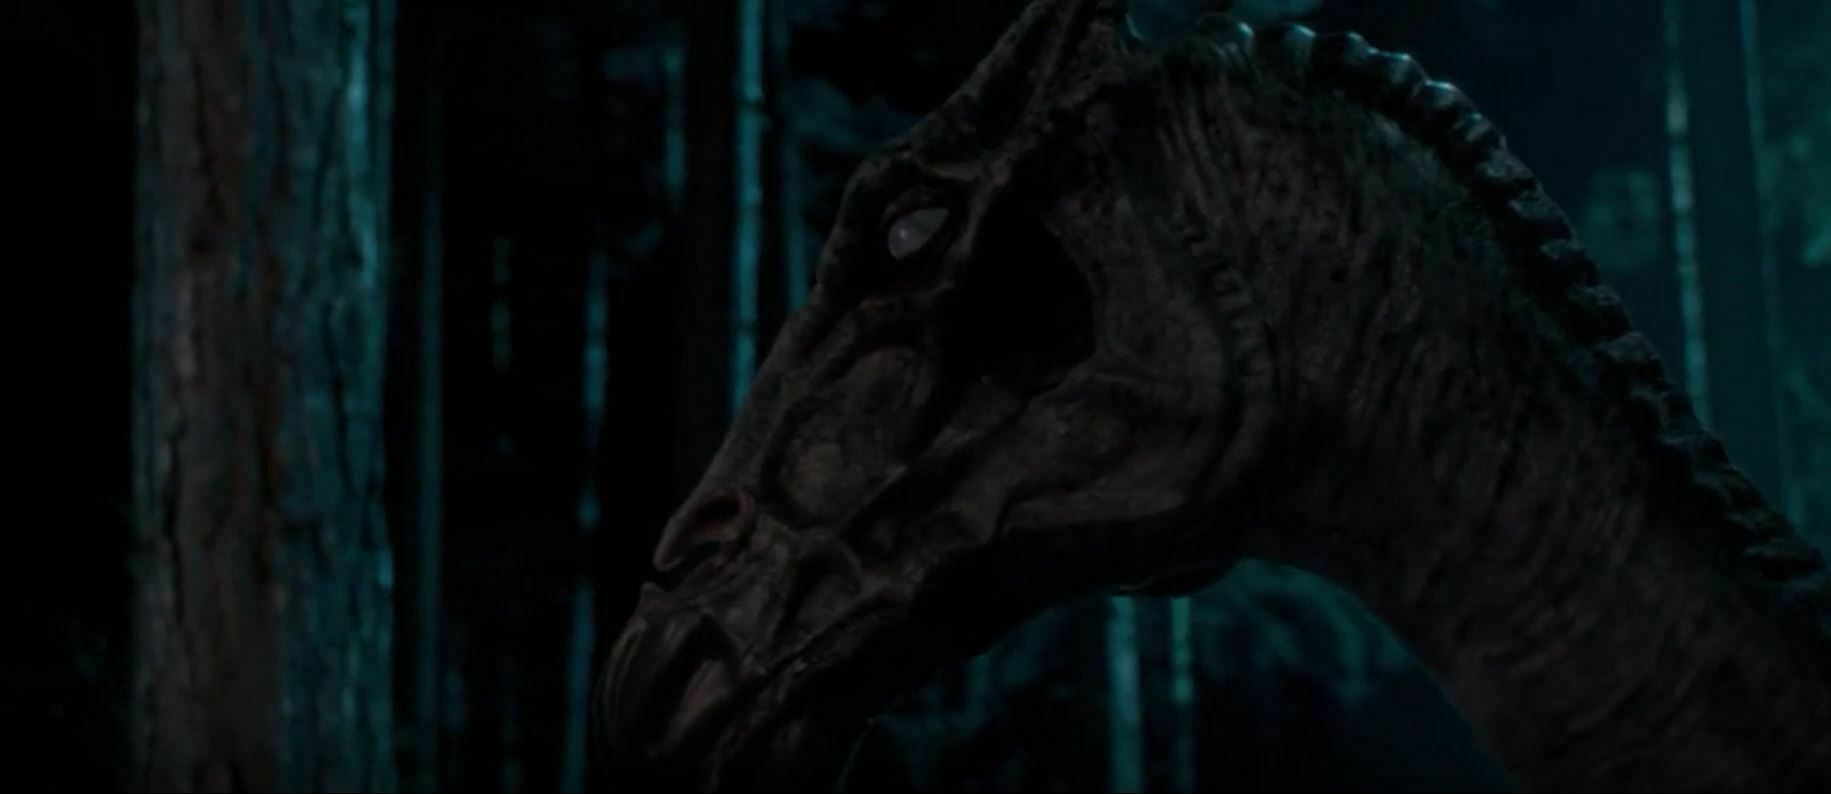 beasts, beings, & spirits a brief history on classification in harry potter